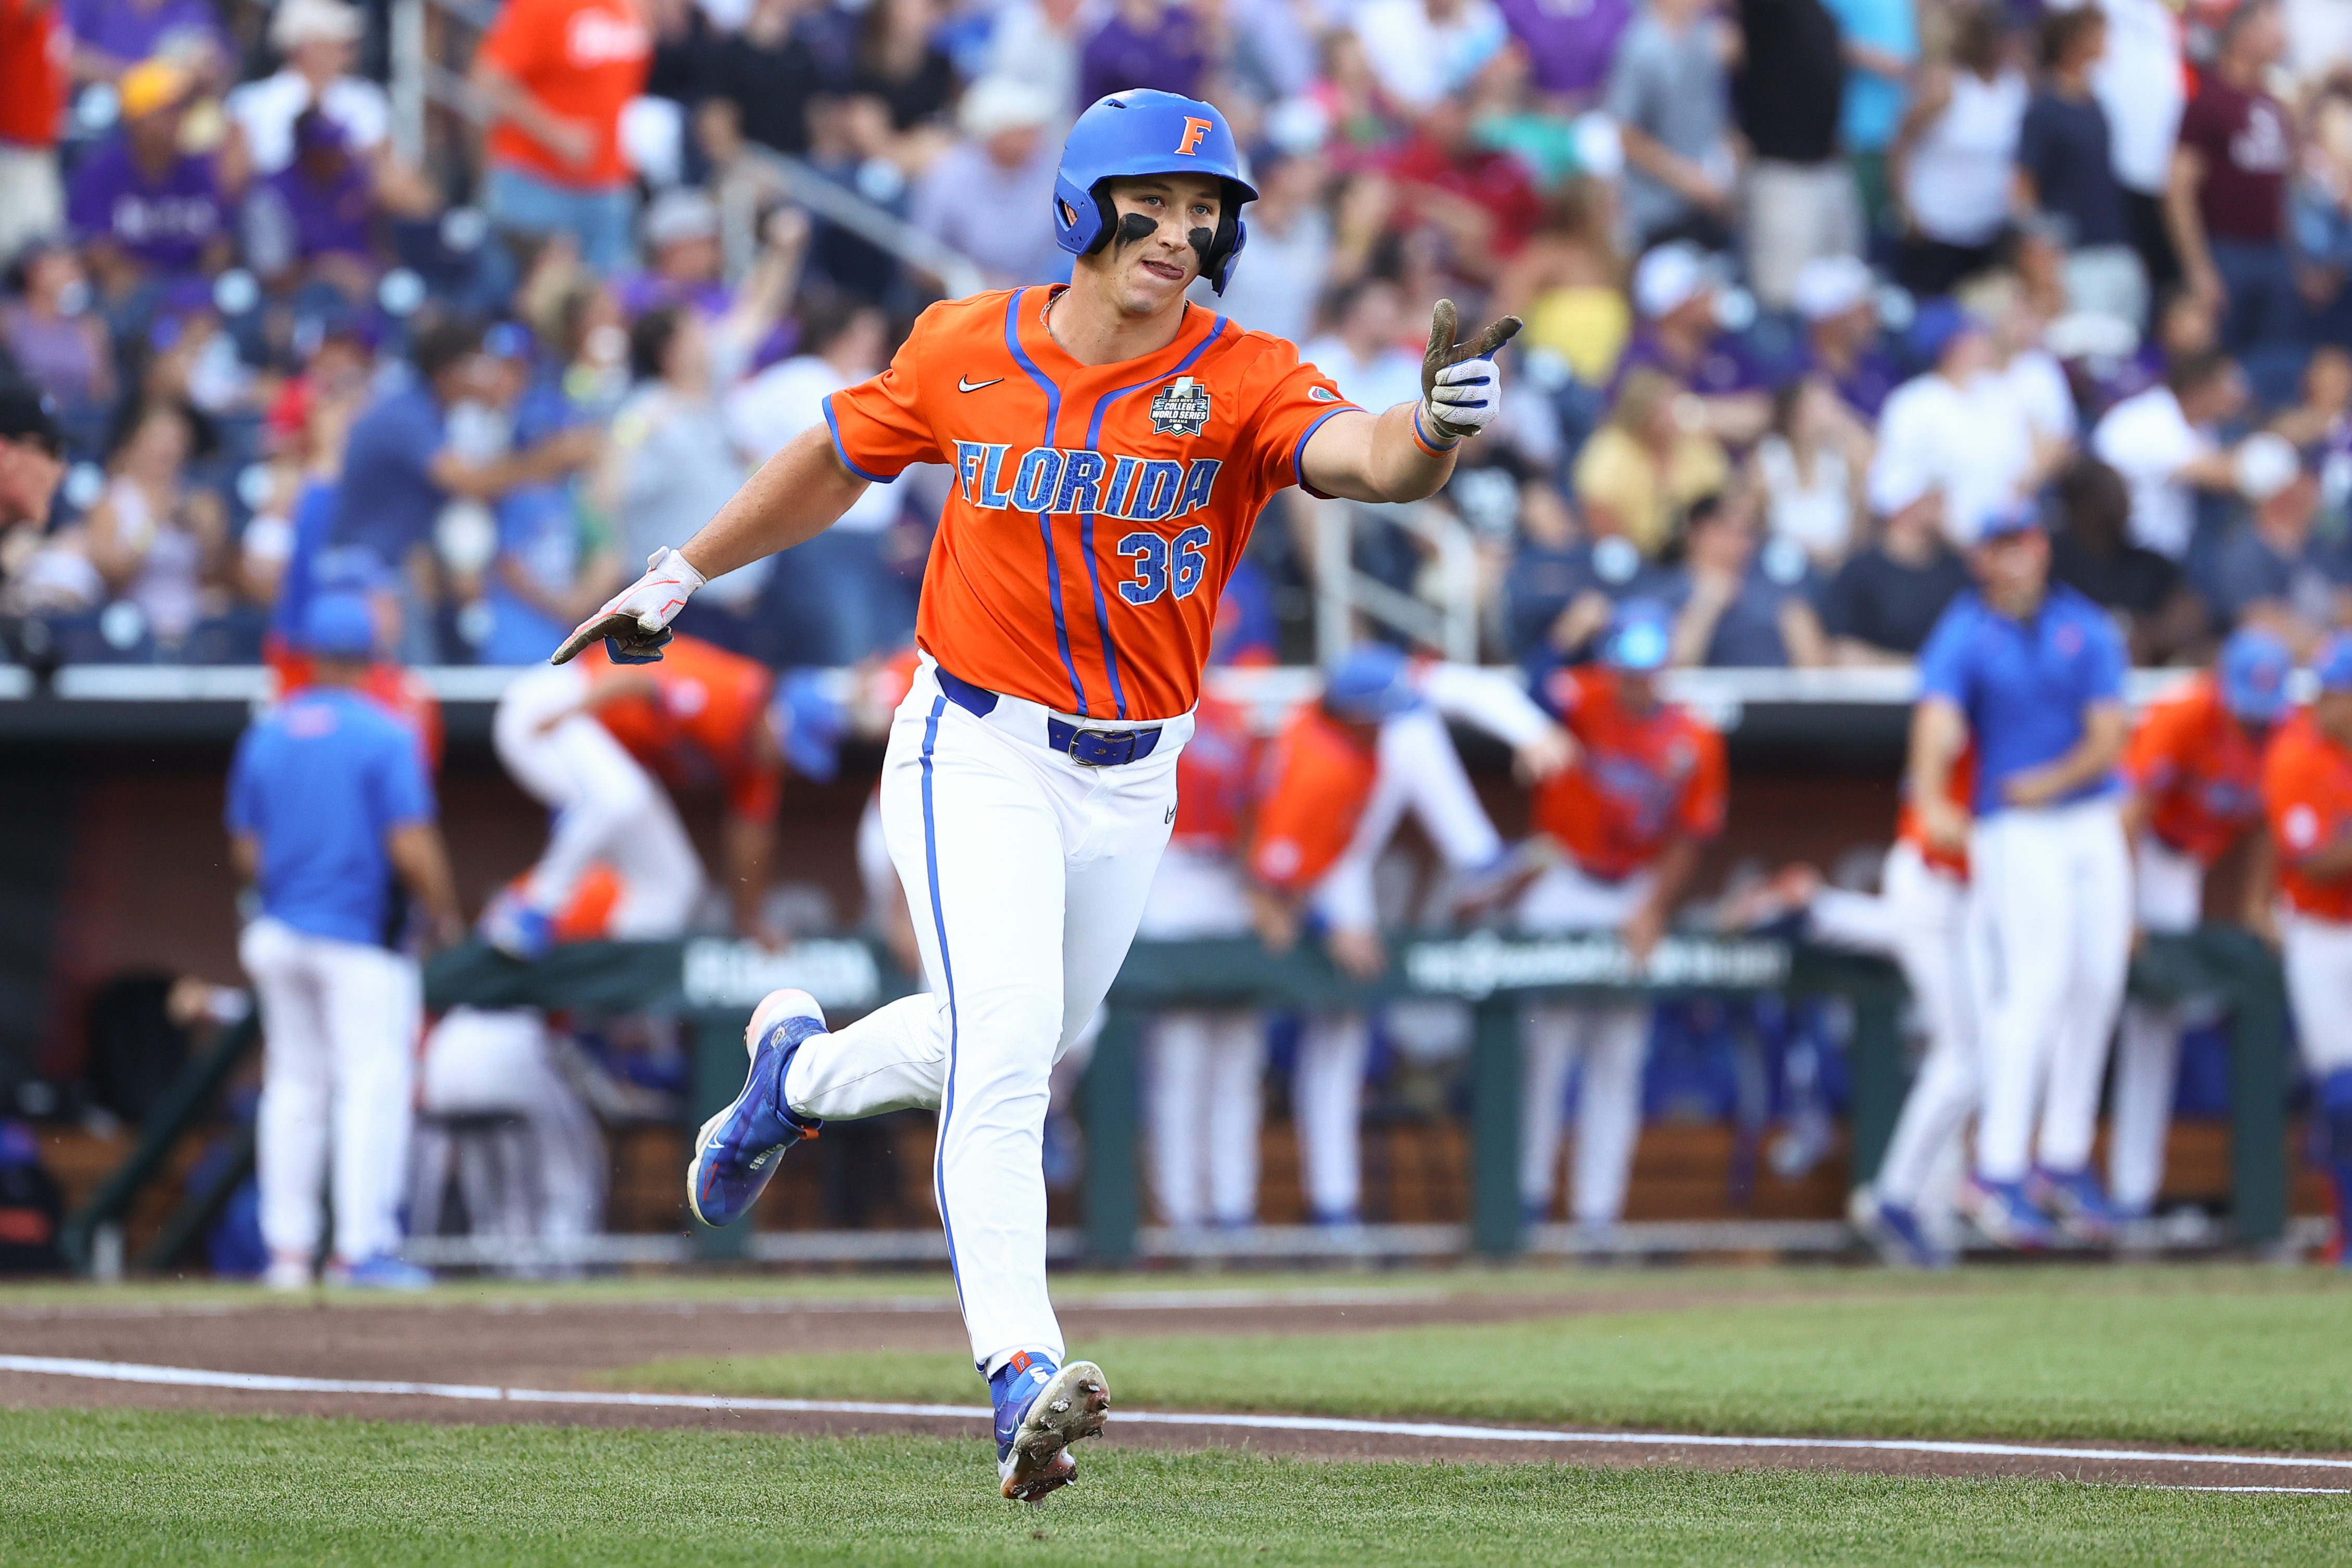 Wyatt Langford of the Florida Gators hits a home run against the LSU Tigers in the first inning of game three of the Division I Men’s Baseball Championship held at Charles Schwab Field on June 26, 2023 in Omaha, Nebraska.